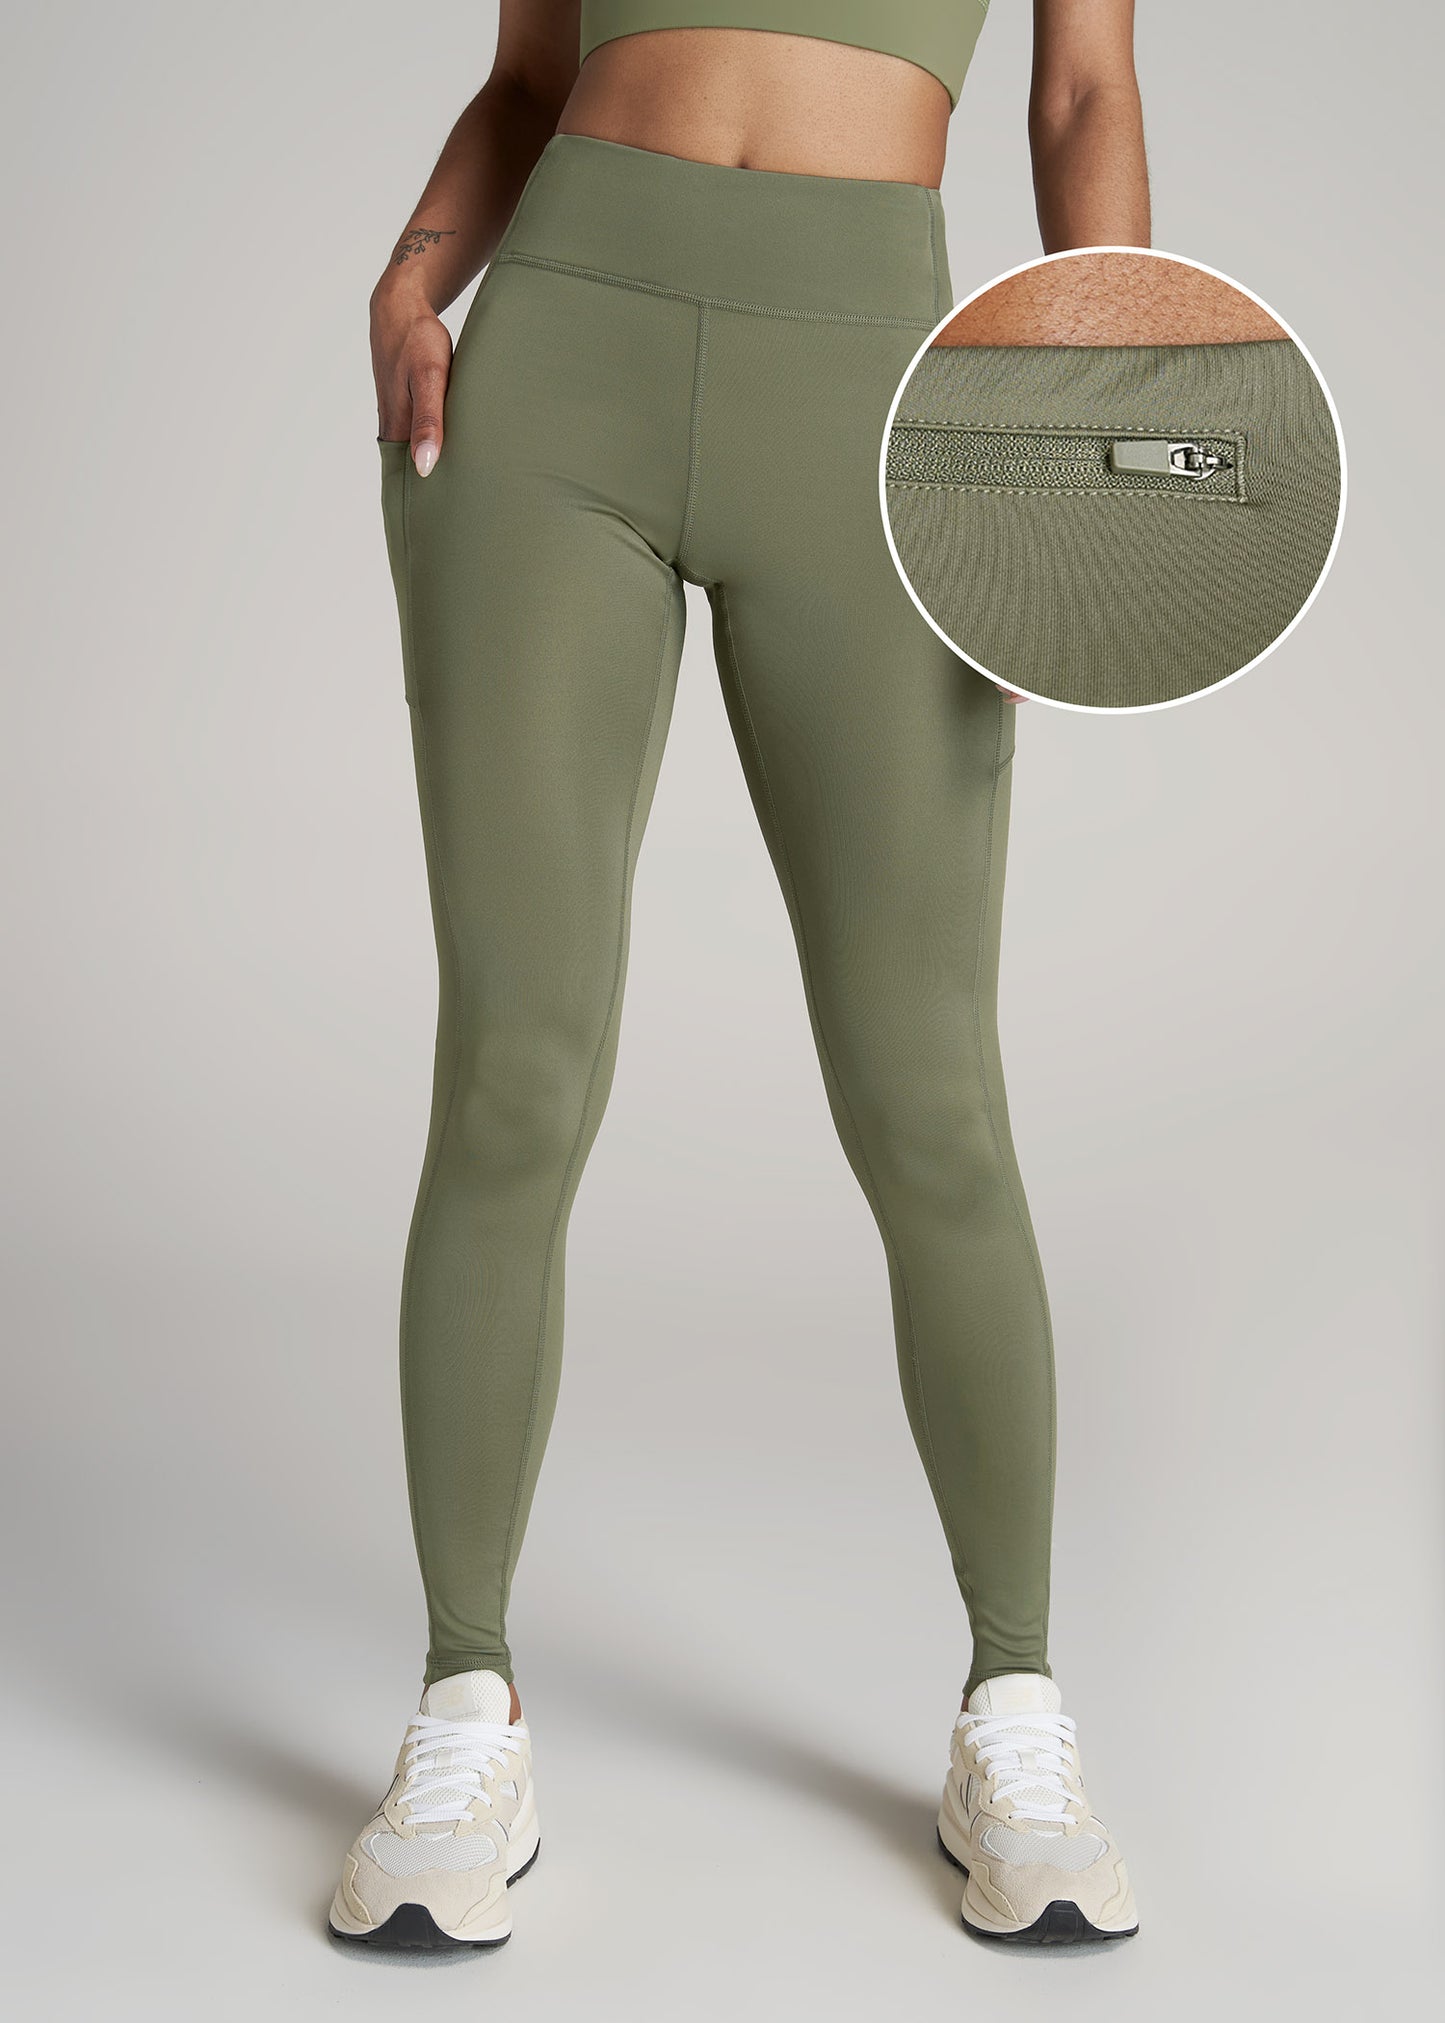 Women's Classic High-waisted Olive Green Leggings With Pockets